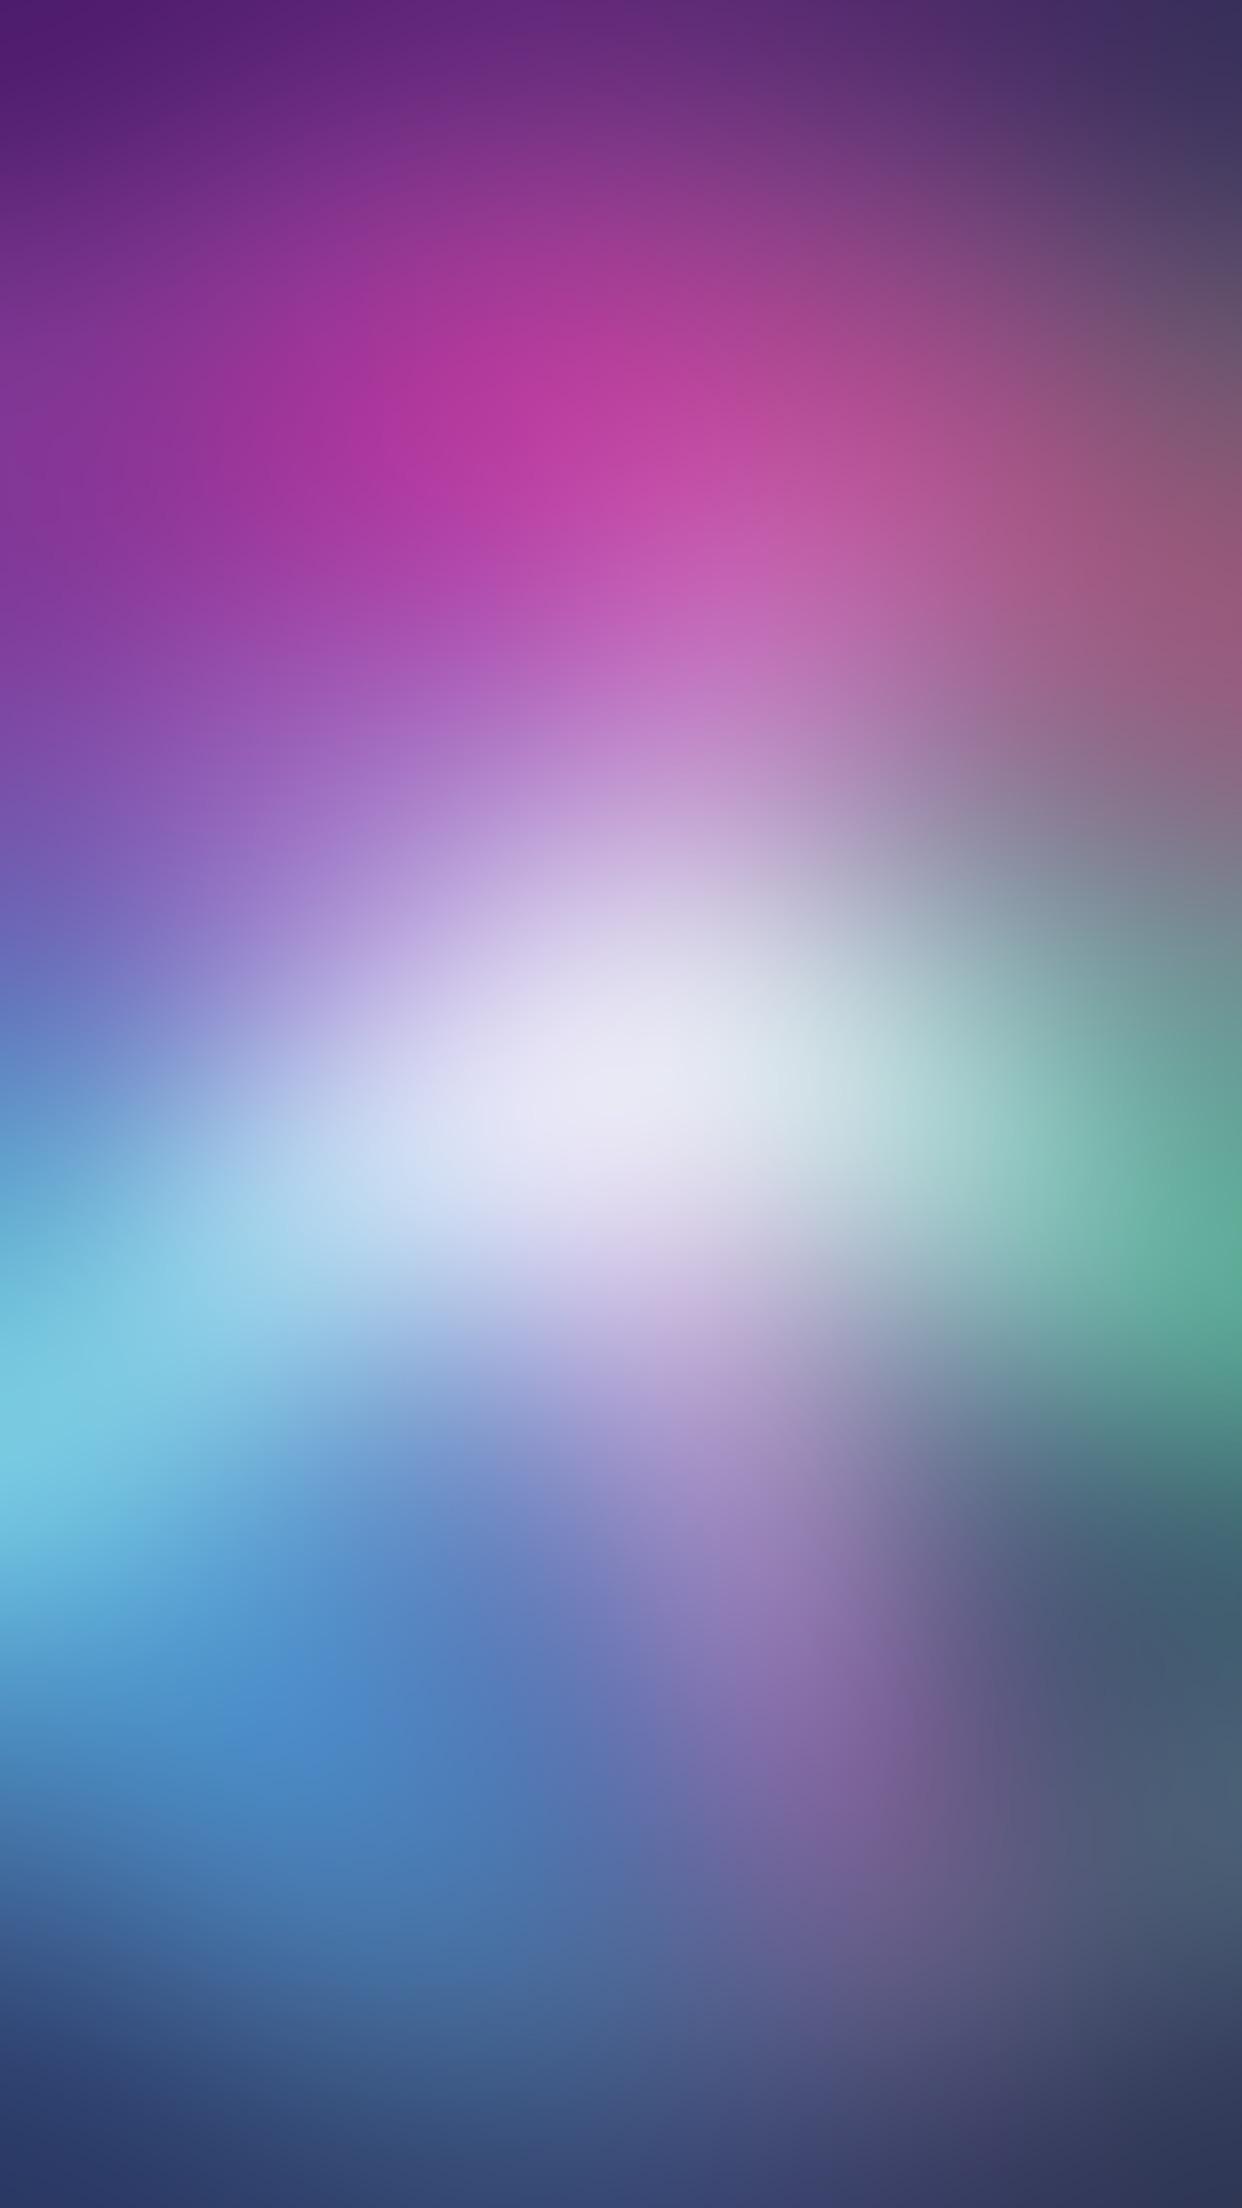 Here's a Siri gradient wallpaper I made from iOS 11